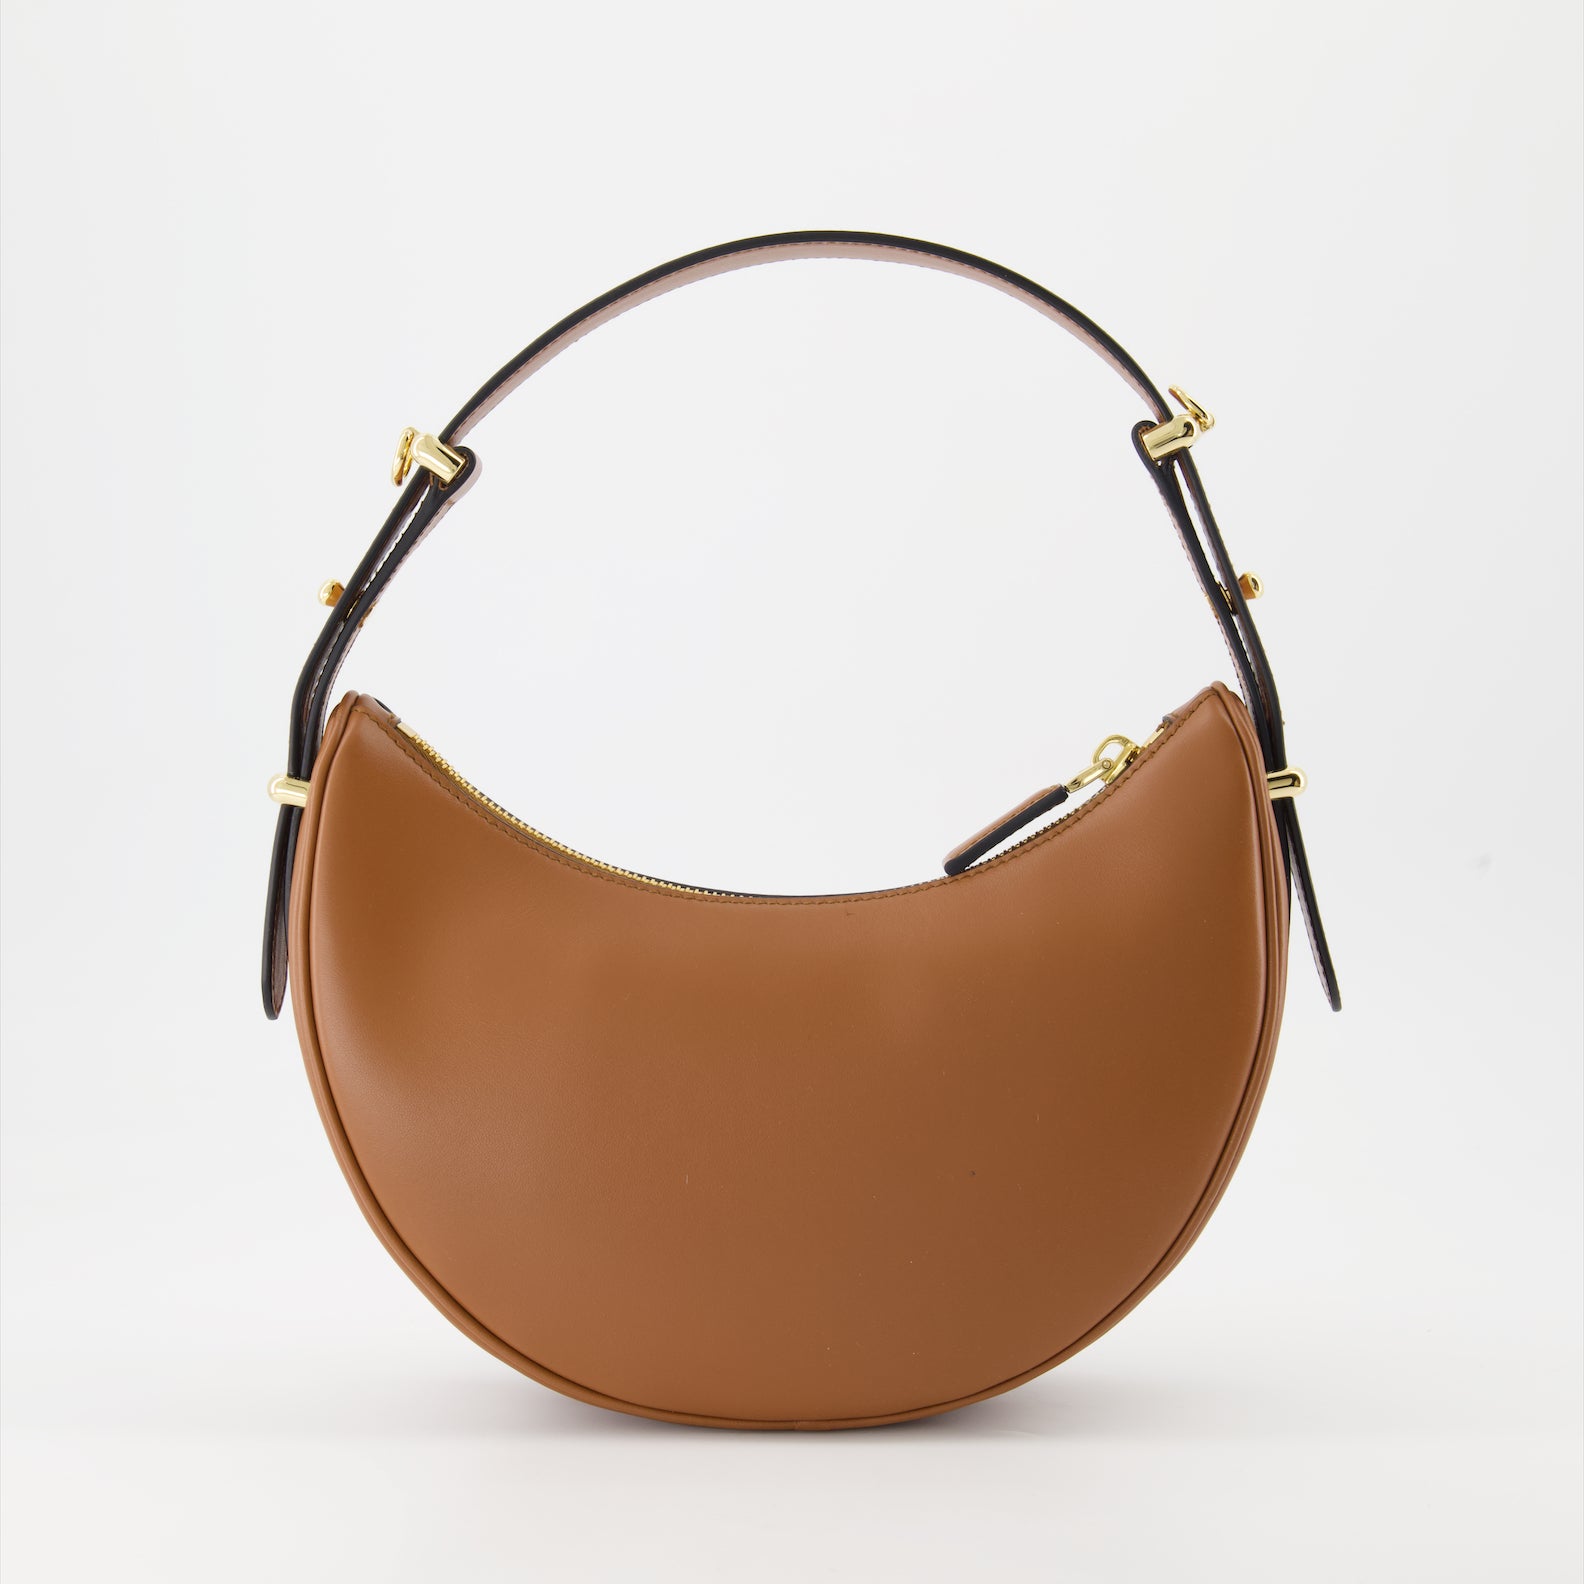 Arched leather bag